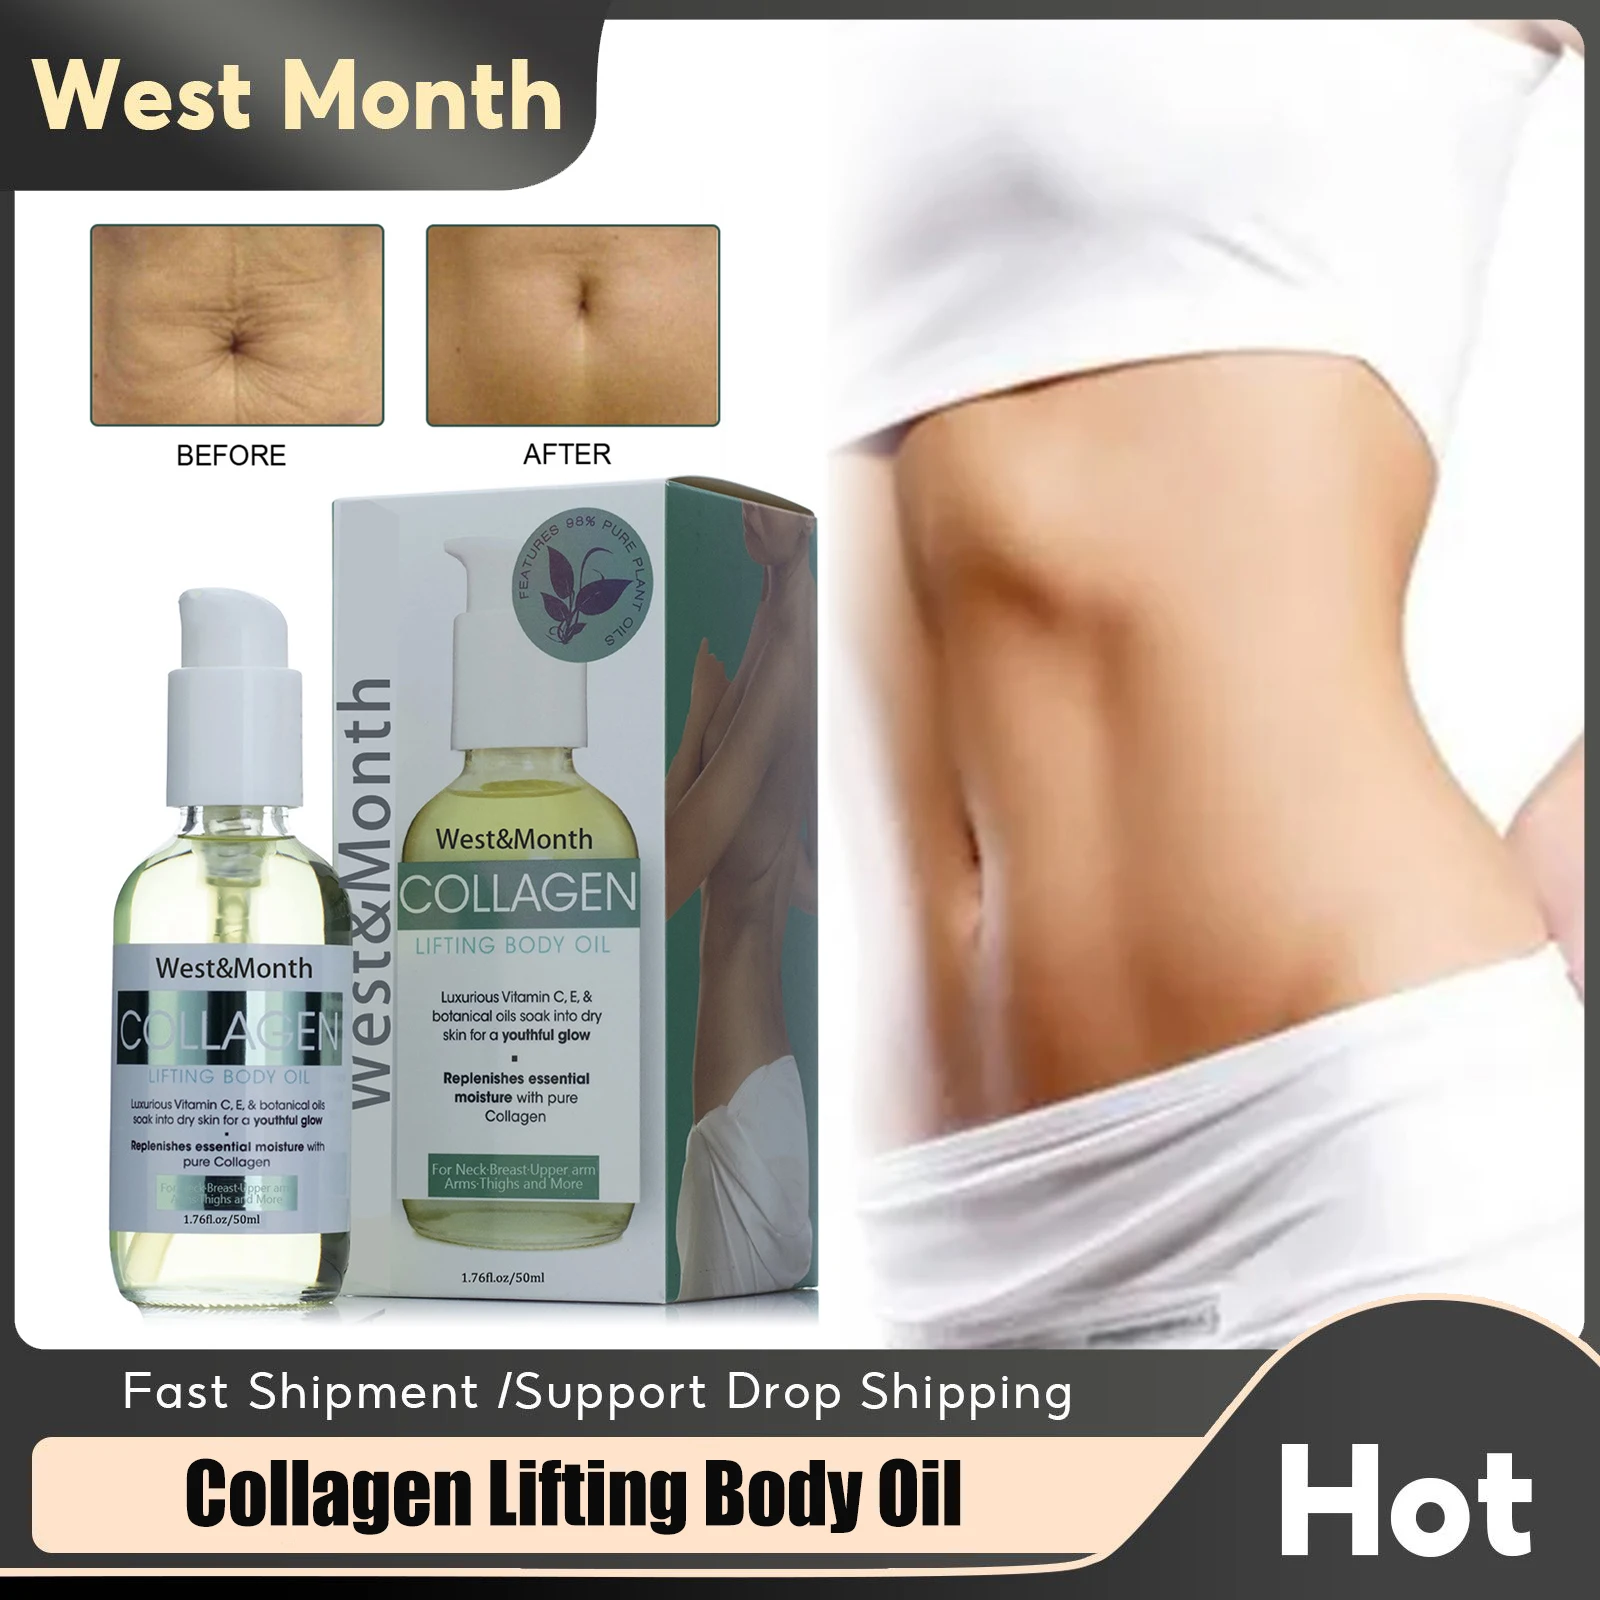 

Collagen Lifting Body Oil For Neck Shoulders Arms Thighs Legs Anti Cellulite Burning Fat Shape Abdomen Improve Firm Nourish Skin